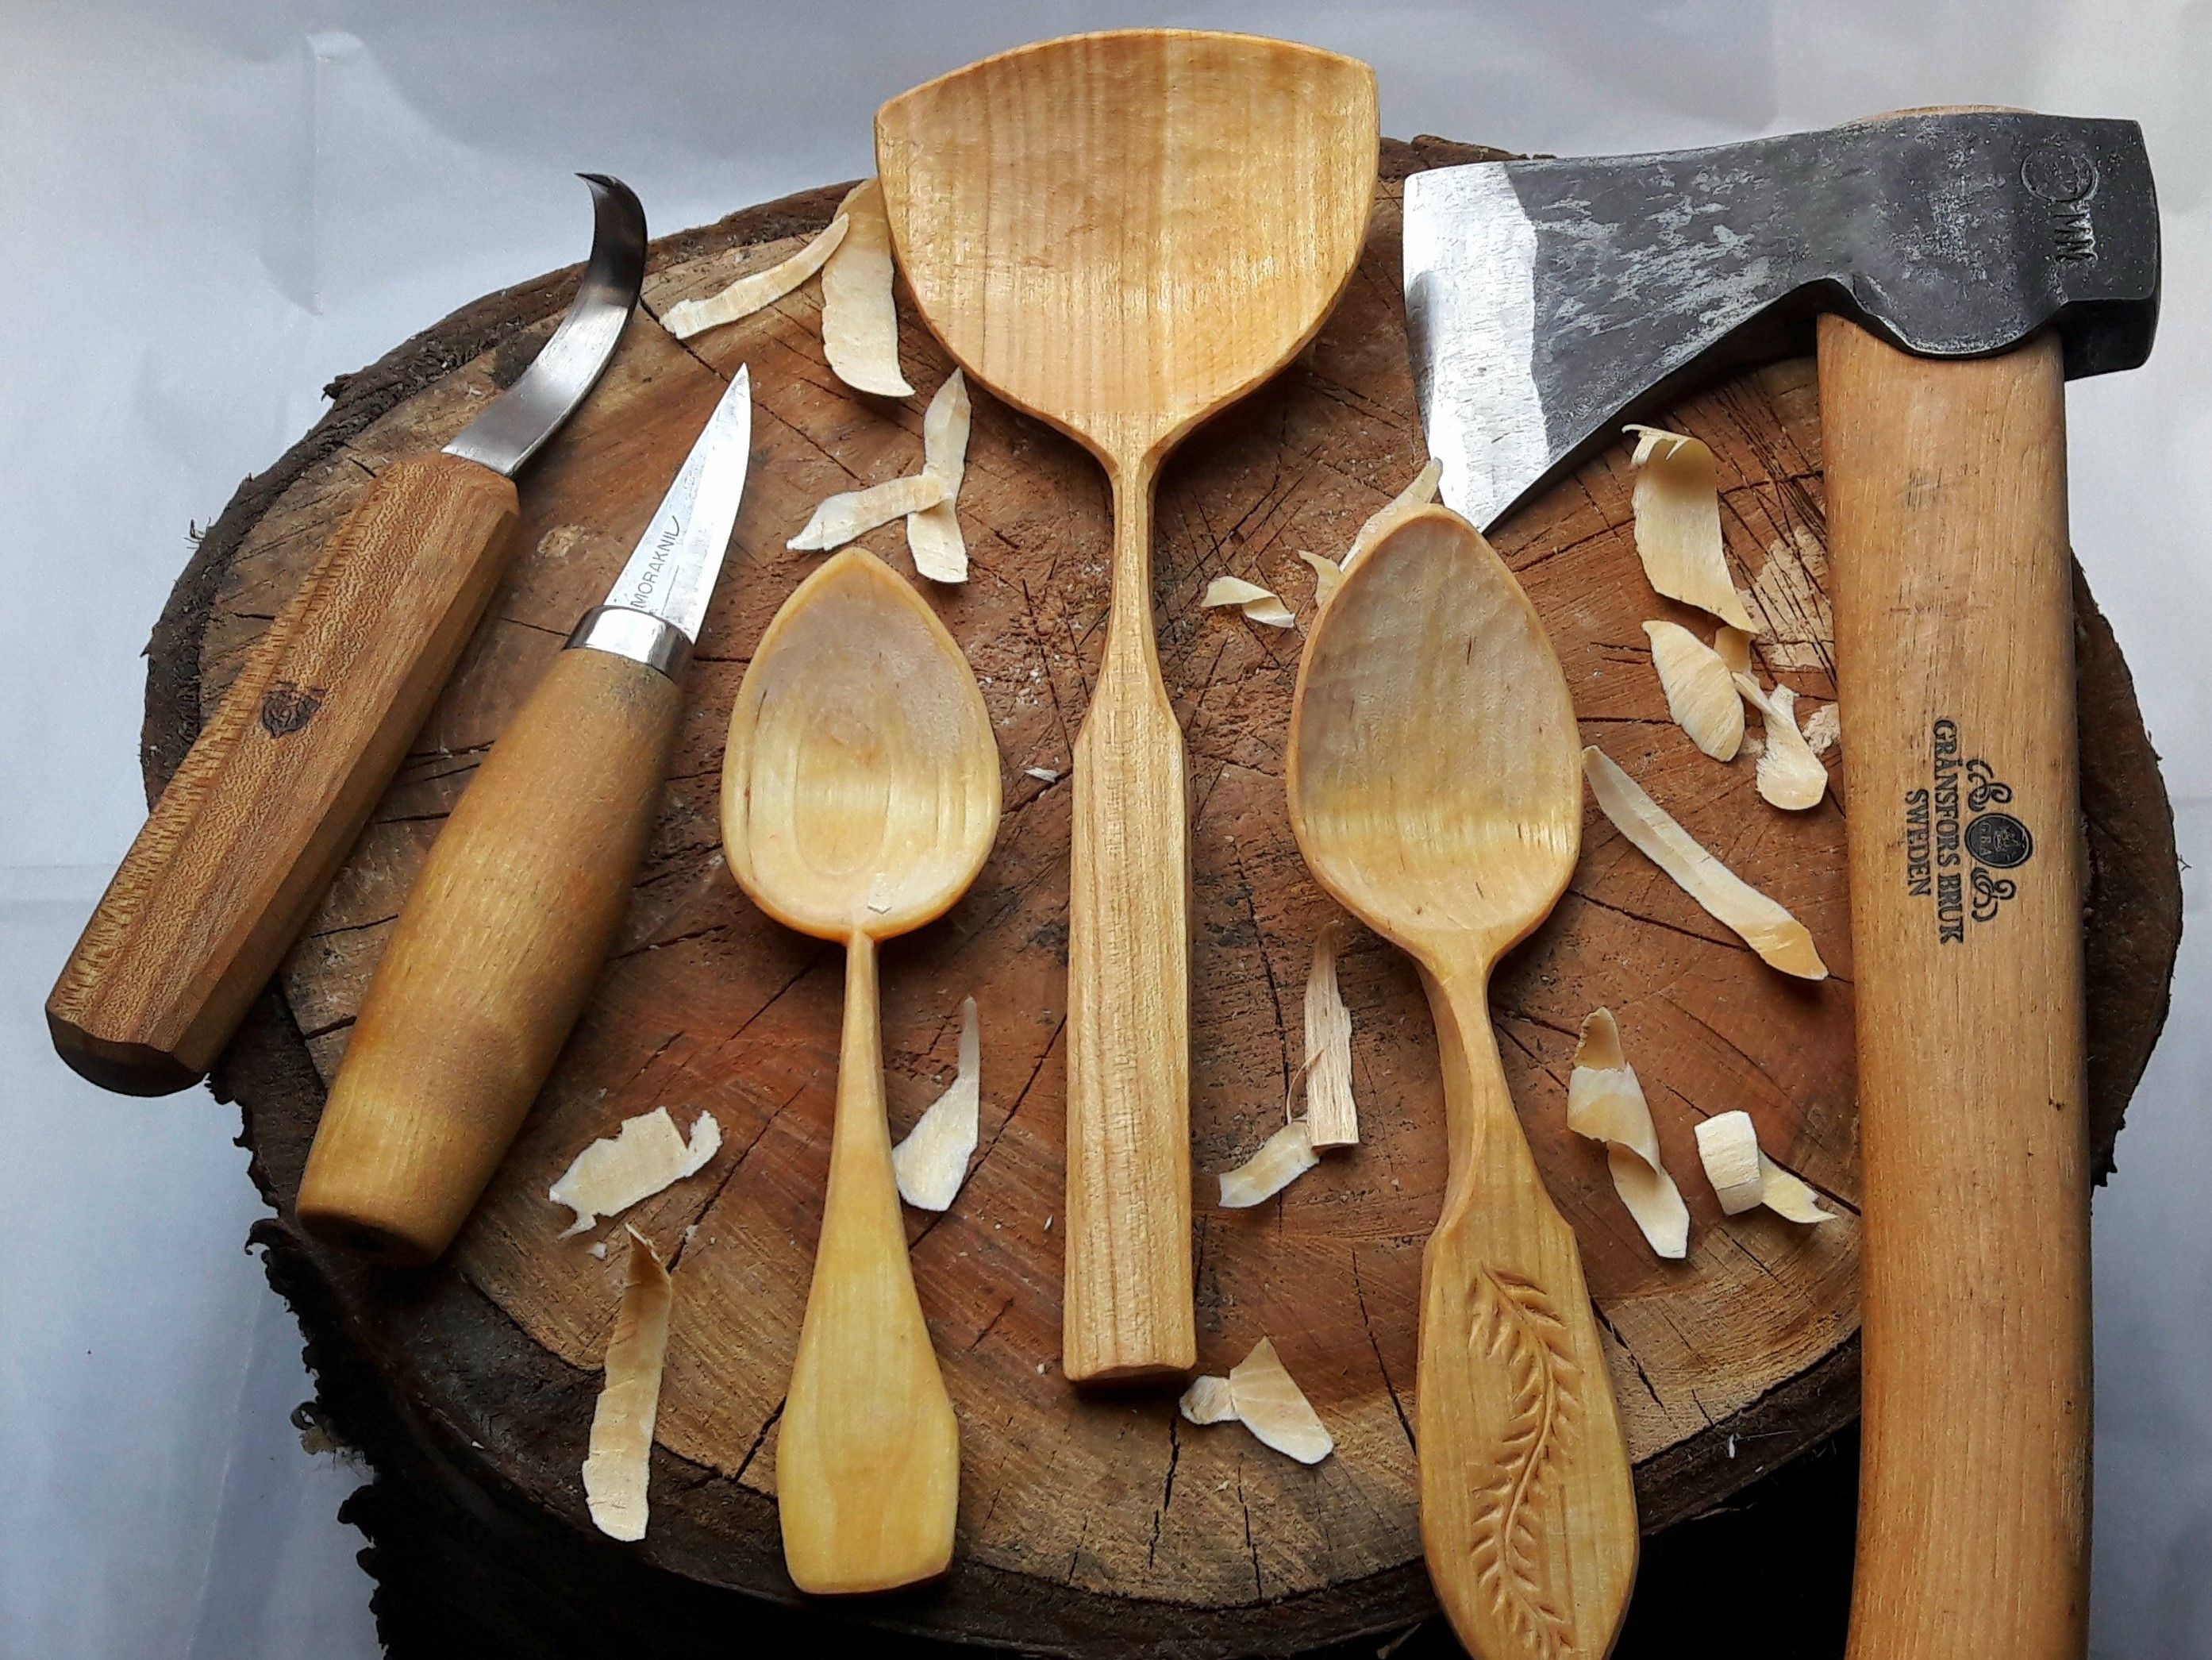 Make It Yourself Spoon Carving Kit  Project kits, Woodworking skills, Make  it yourself